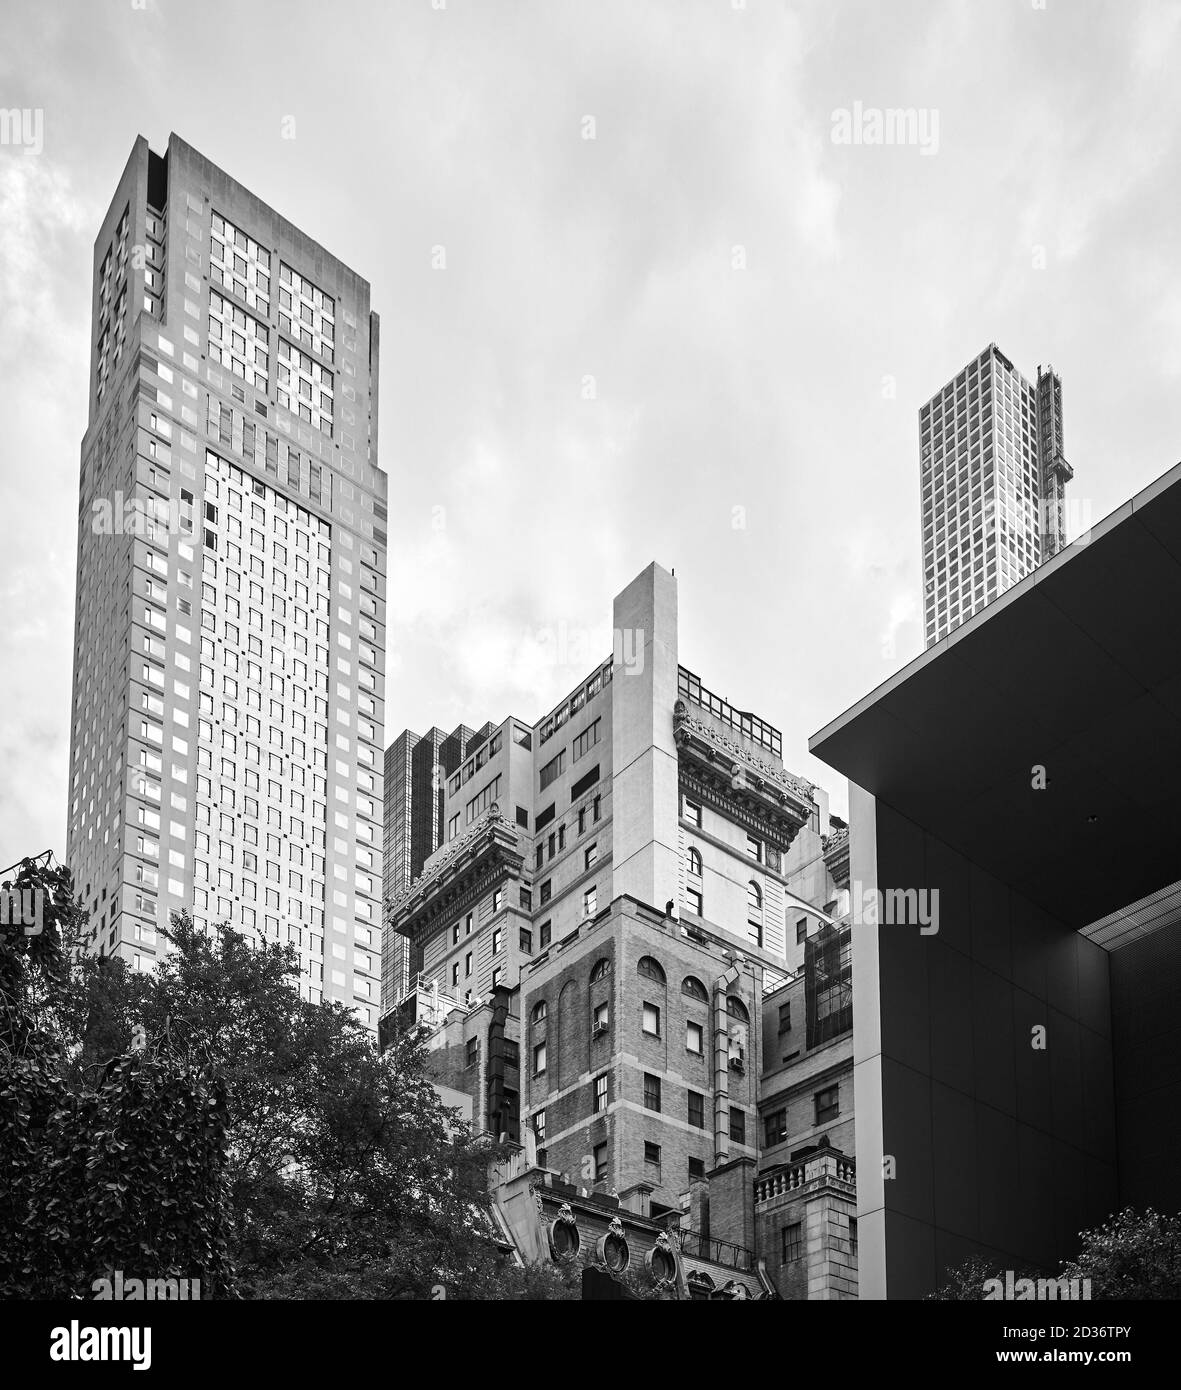 Black and white picture of New York City diverse architecture on a cloudy day, USA. Stock Photo